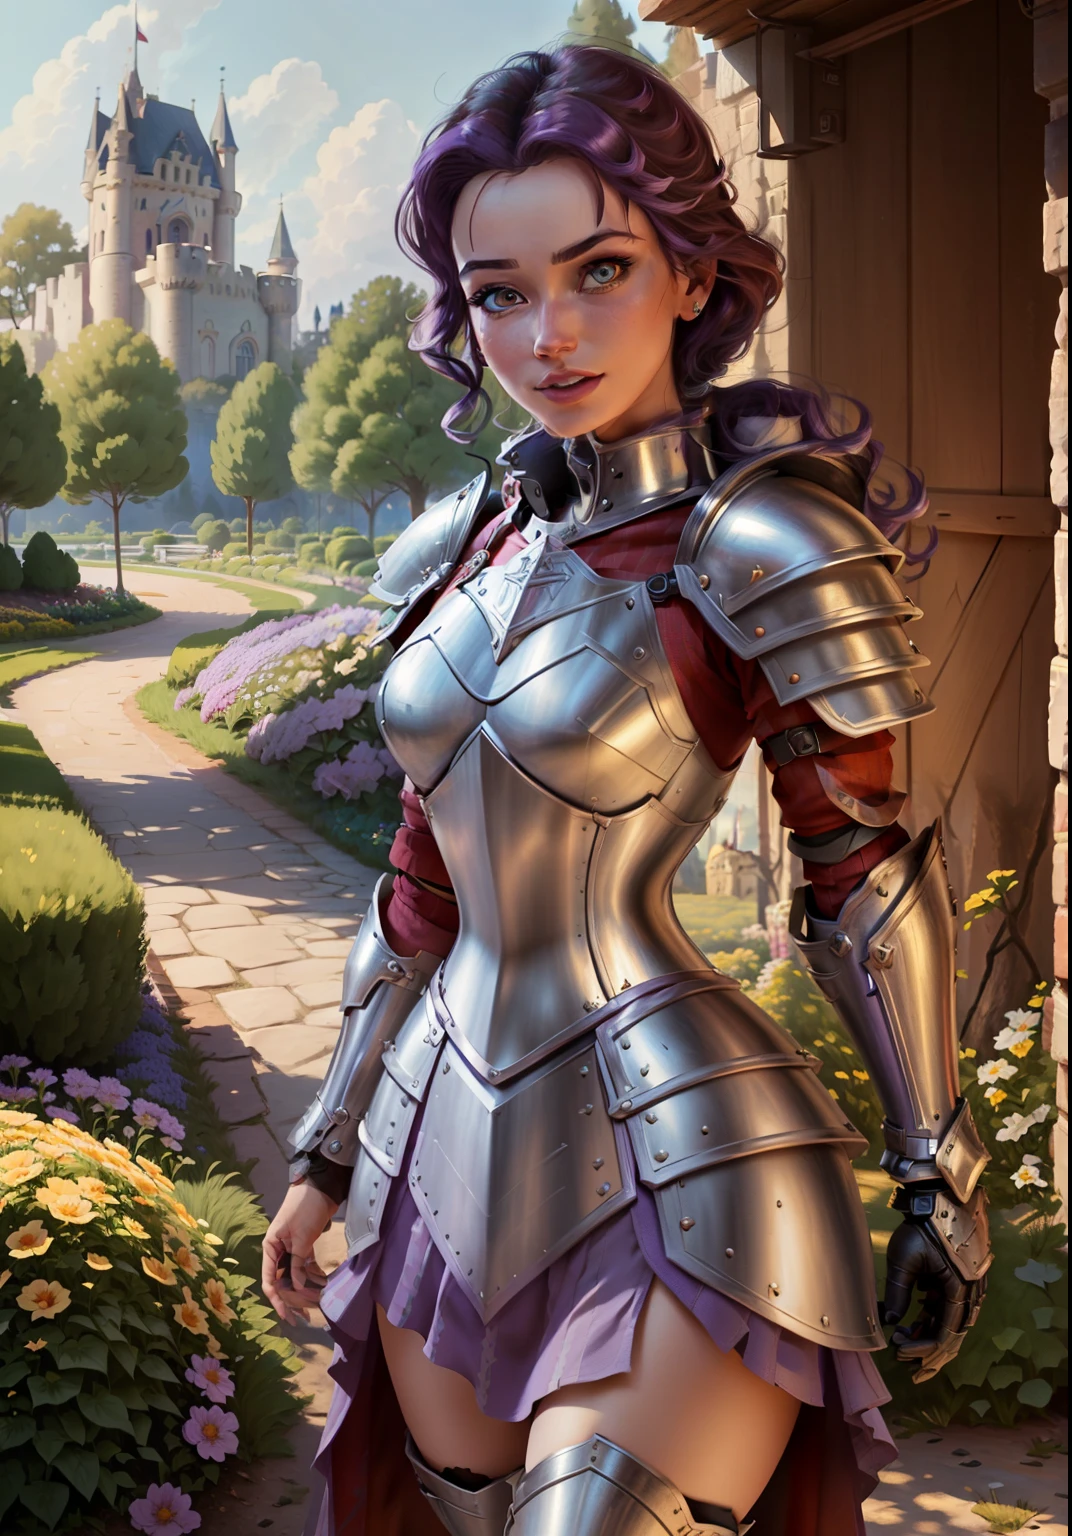 (BelleWaifu:1), (knight's armor:0.3), the garden in the background, surprised, cute, cute pose, (flirting), looking at the viewer, (square hairstyle), (purple hair), (red skirt:0.7), (knight's armor with exposed areas of the body:1.5), :D, (realistic: 1), (cartoon), (masterpiece: 1.2), (best quality), (over-detailed), (8k, 4k, intricate), (full-length shot: 1), (cowboy shot: 1.2), (85mm), light particles, lighting, (very detailed: 1.2), (detailed face: 1), (gradients), sfw, colorful, (detailed eyes: 1.2), (detailed landscape, trees, garden, castle:1.2),(detailed background), detailed landscape, (dynamic angle:1.2), (dynamic pose:1.2), (rule third_composition:1.3), (line of action:1.2), wide view, daylight, solo
